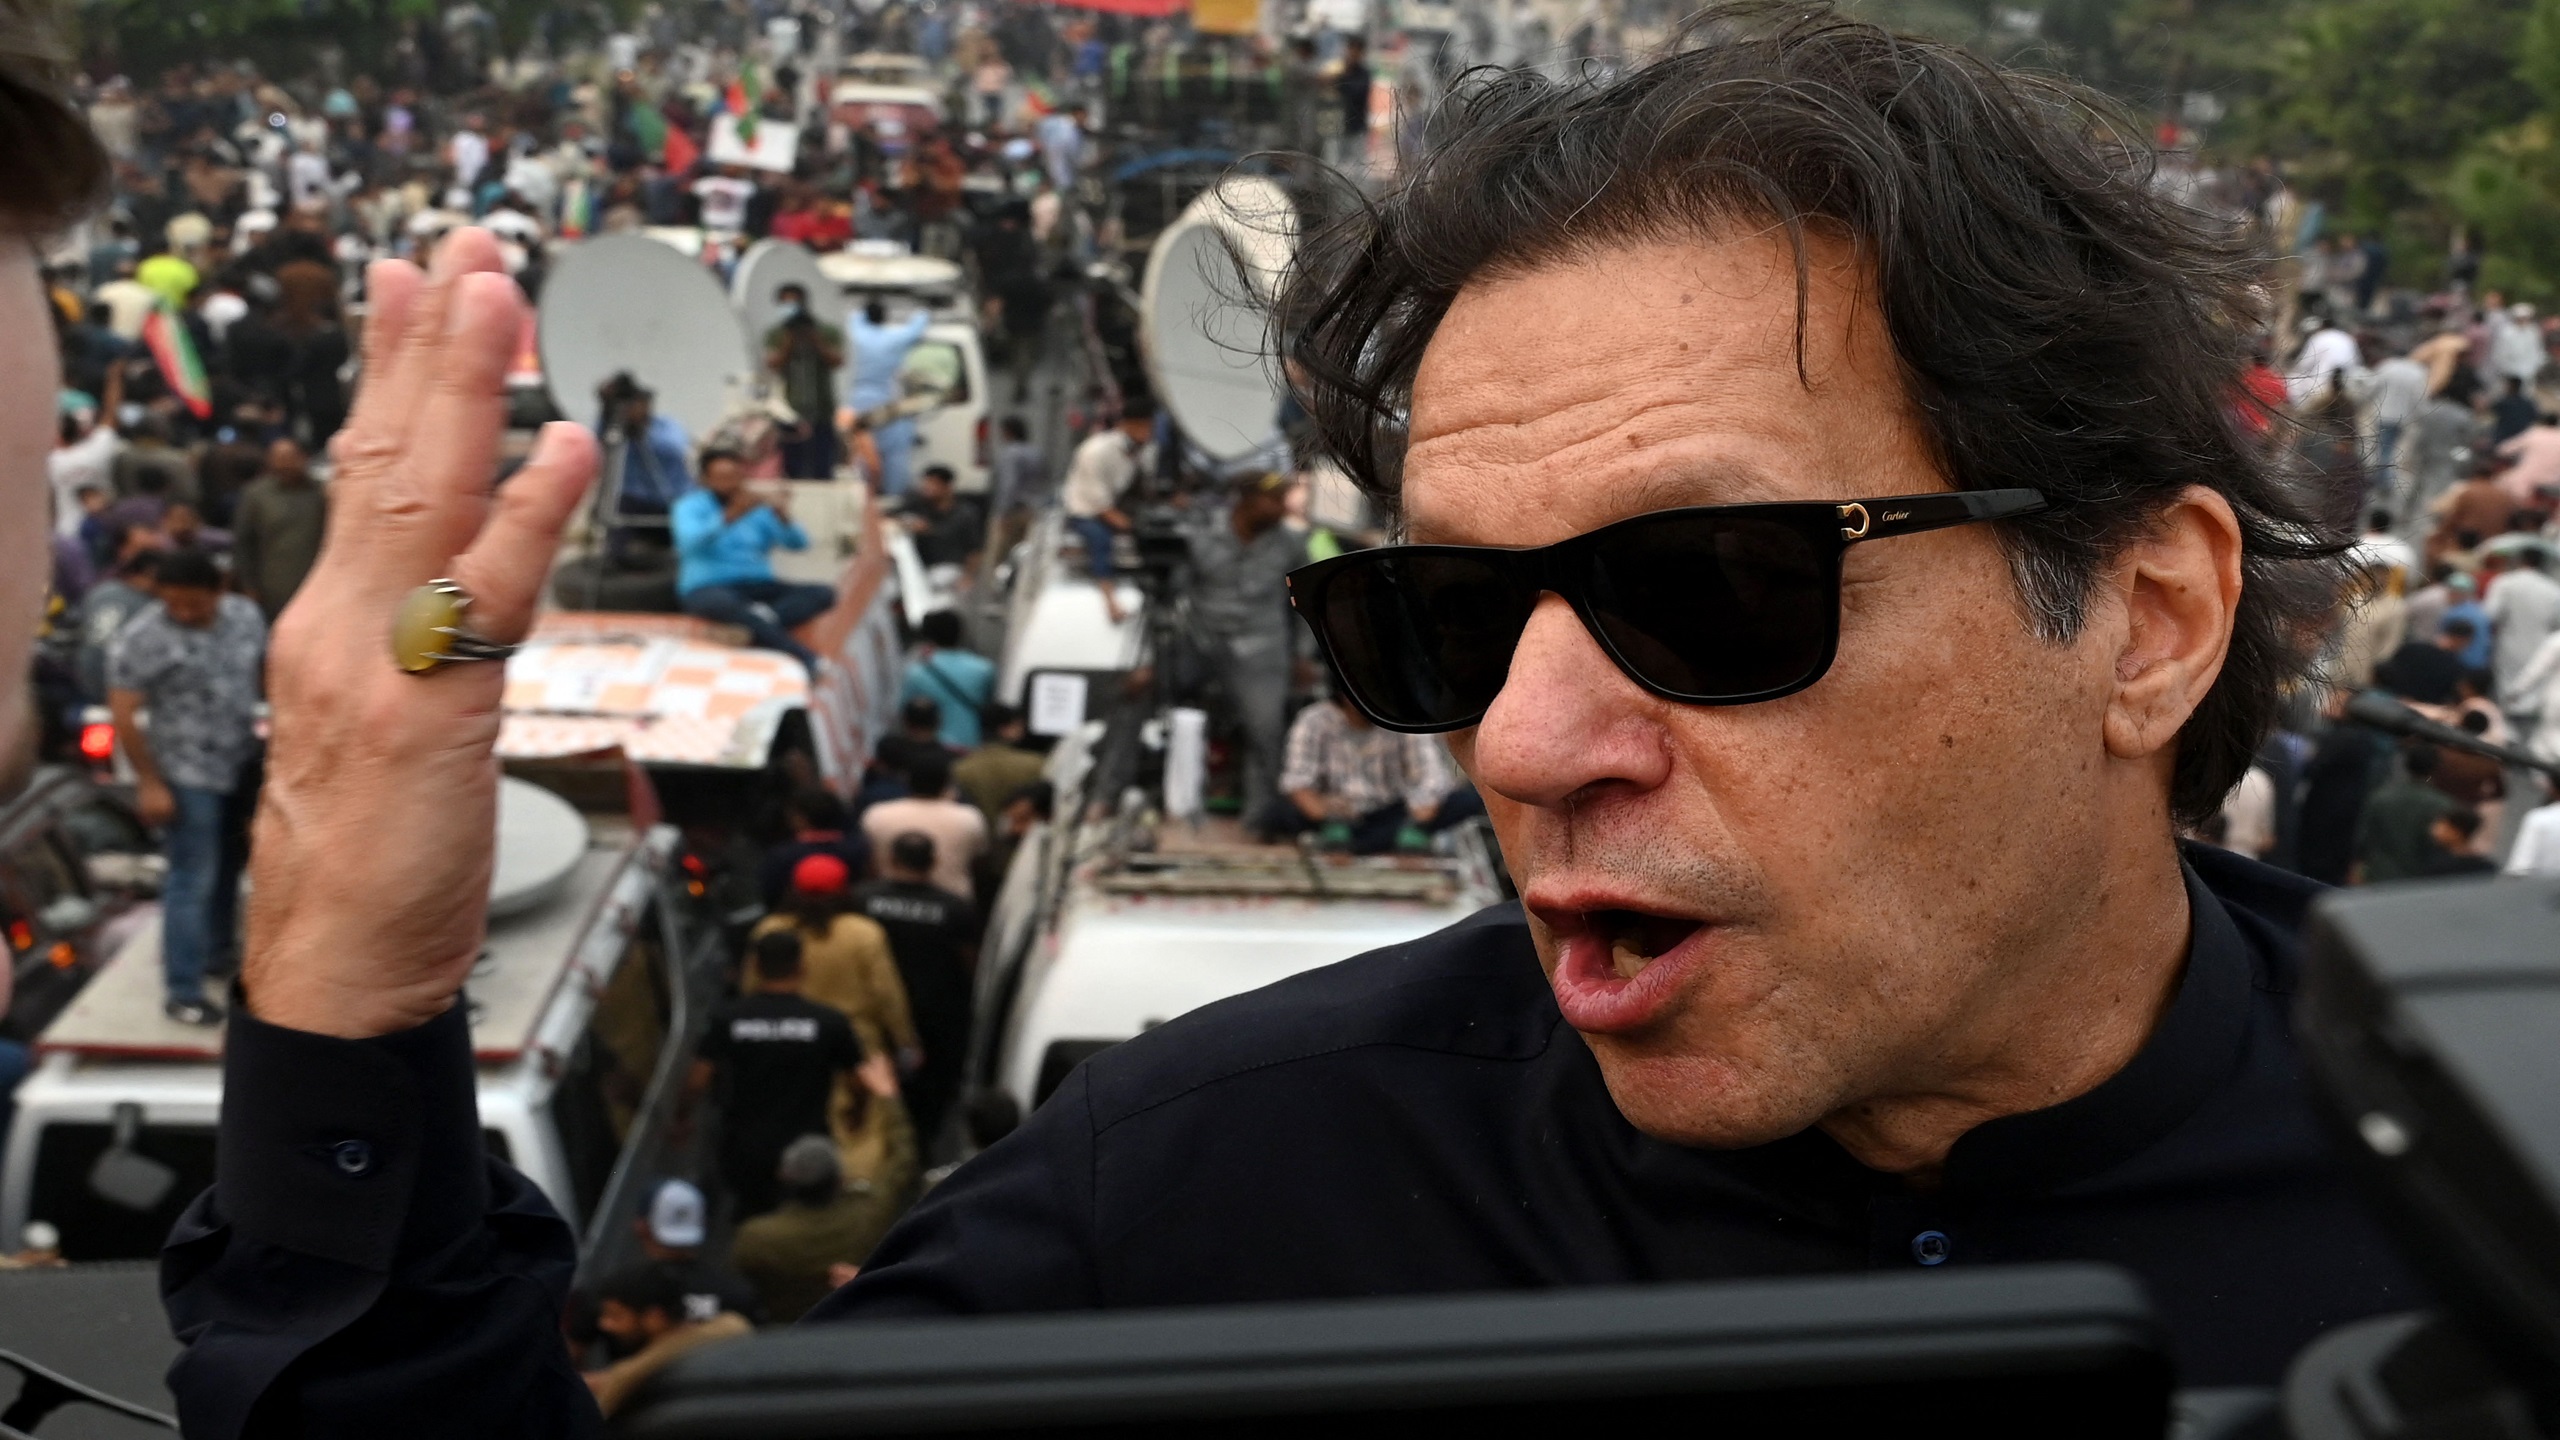 Pakistani Ex-PM Imran Khan Injured in Apparent Attempt on His Life